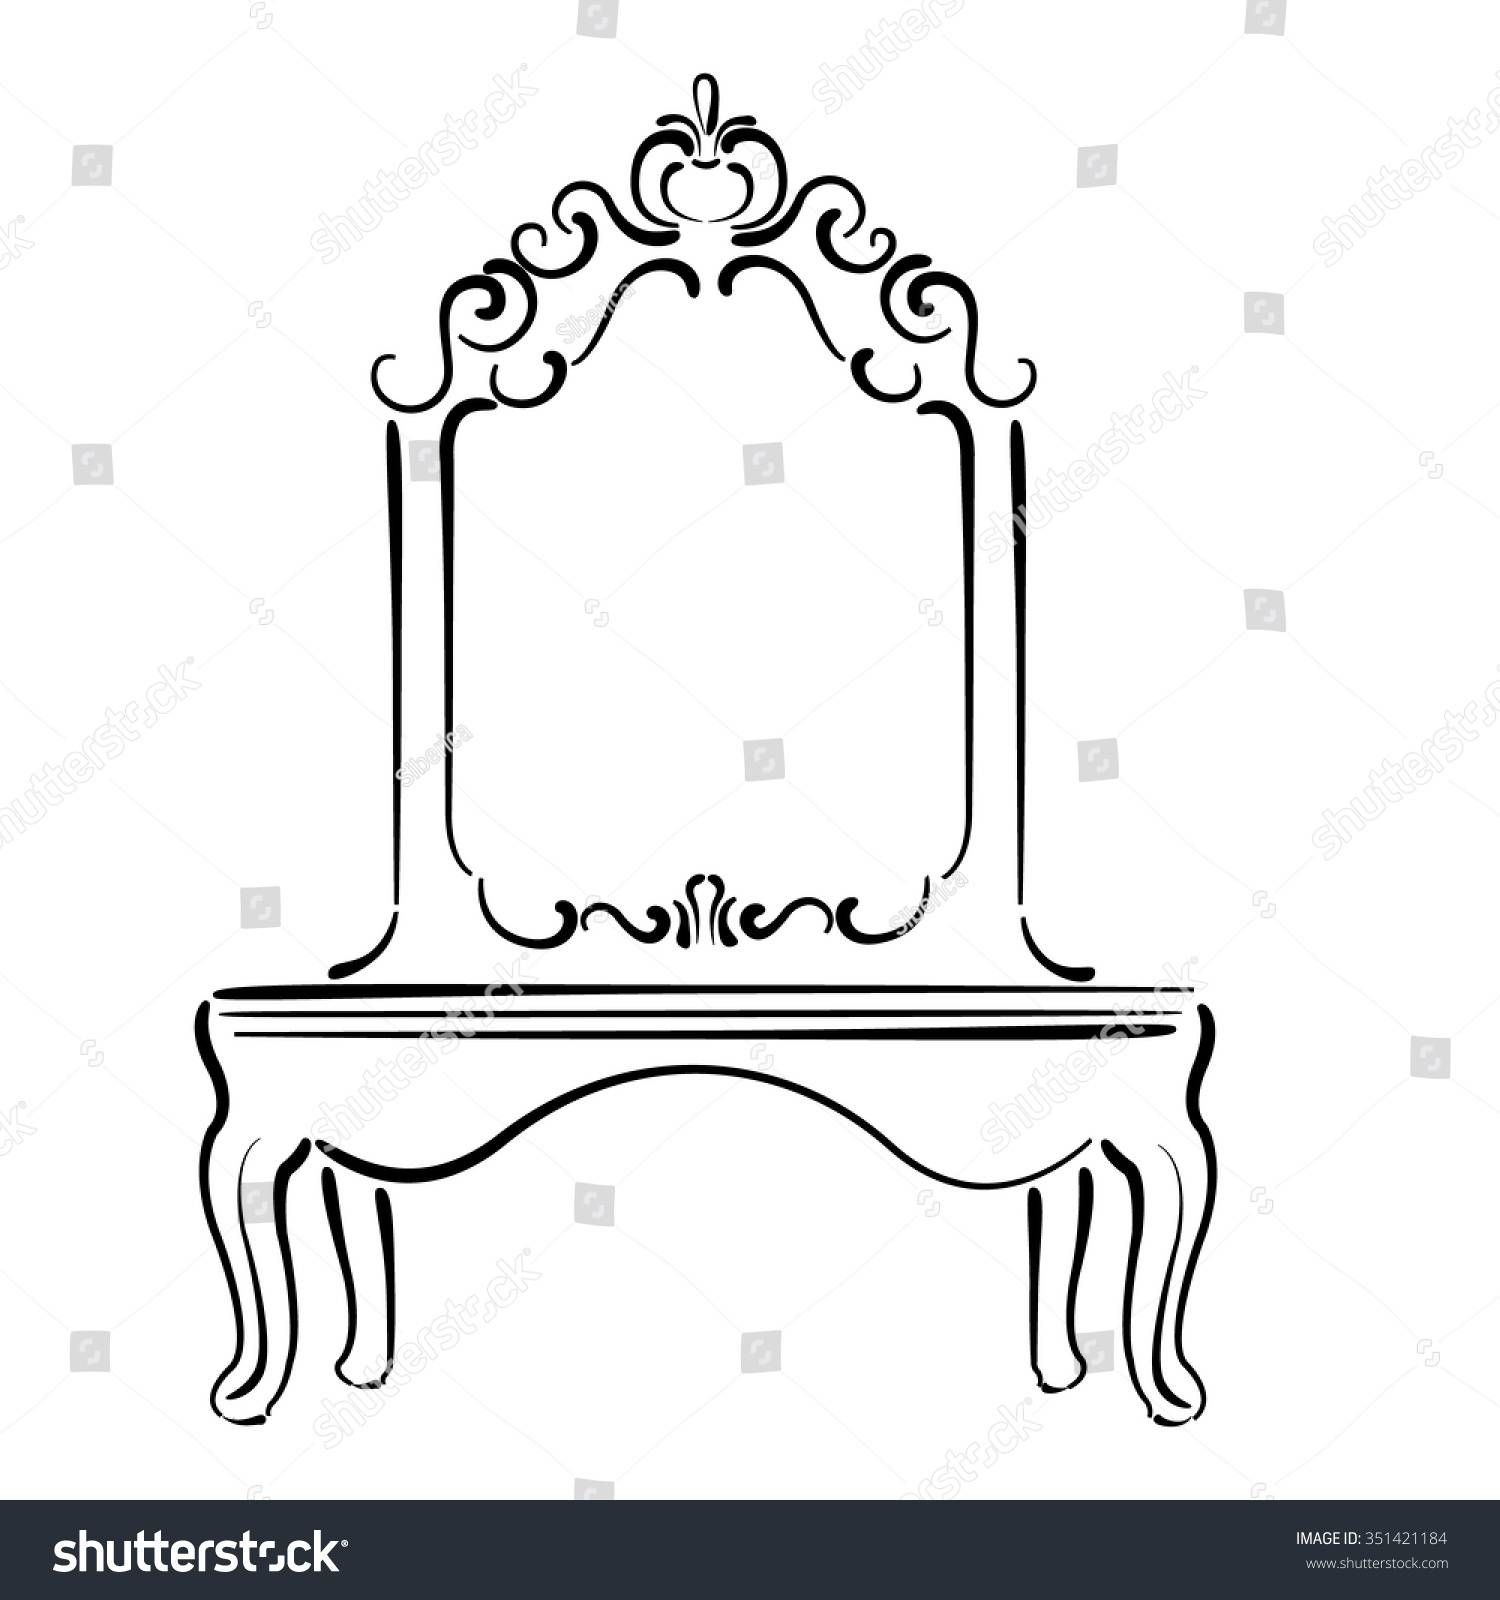 Big Standing Mirror Vintage Interior Sketch Stock Vector 351421184 Throughout Vintage Standing Mirrors (View 15 of 15)